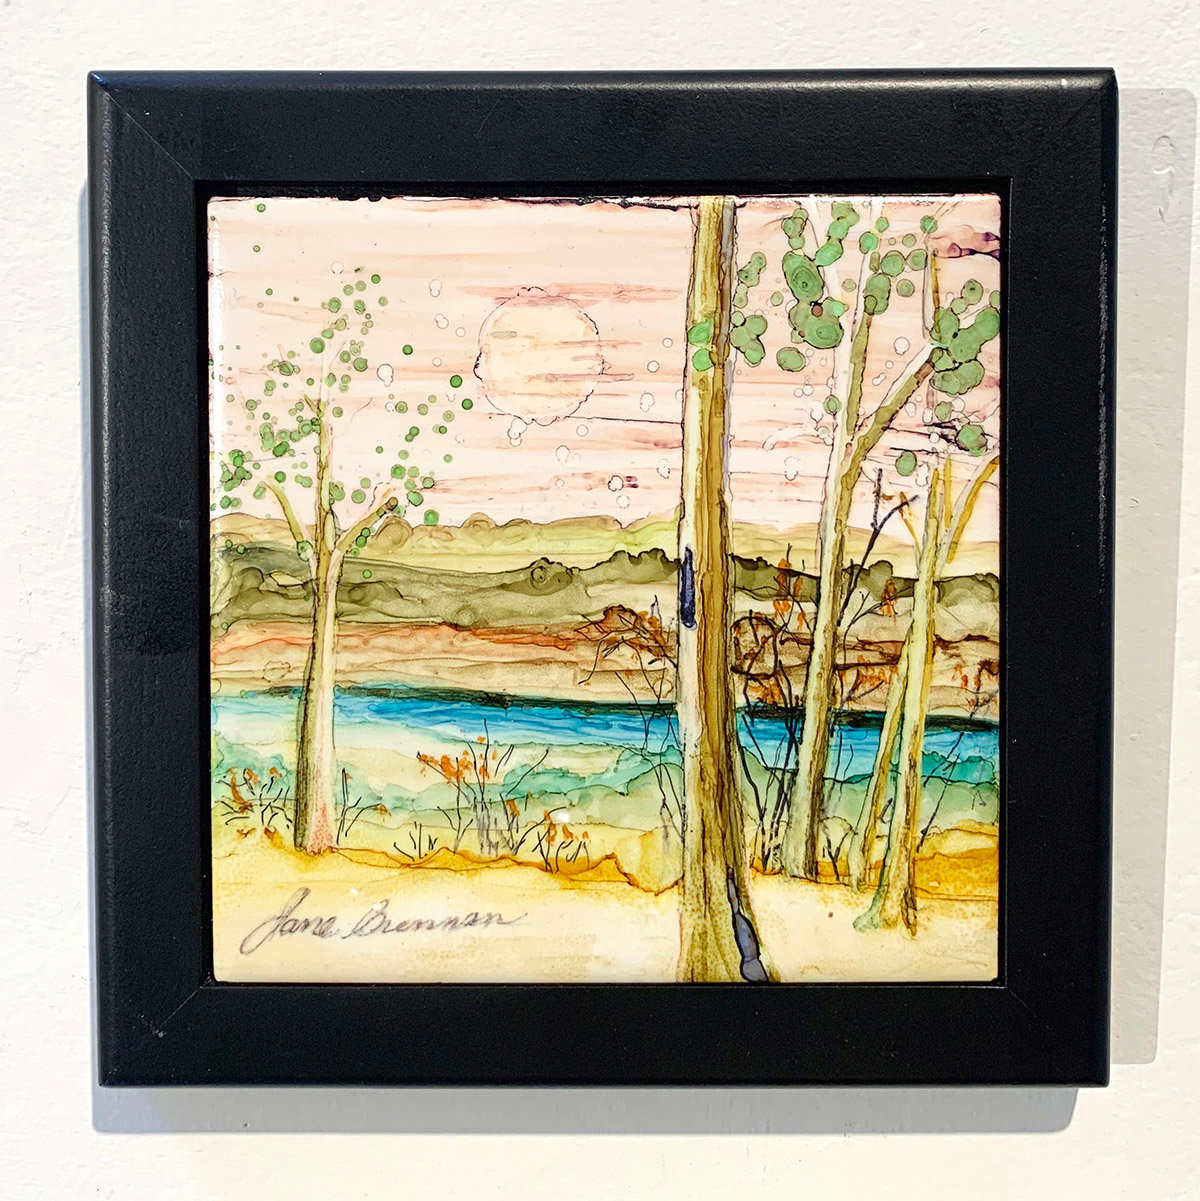 "Full  Moon" by Jane Brennan will be exhibited at "Art in Sixes" at the Delaware Valley Arts Alliance.